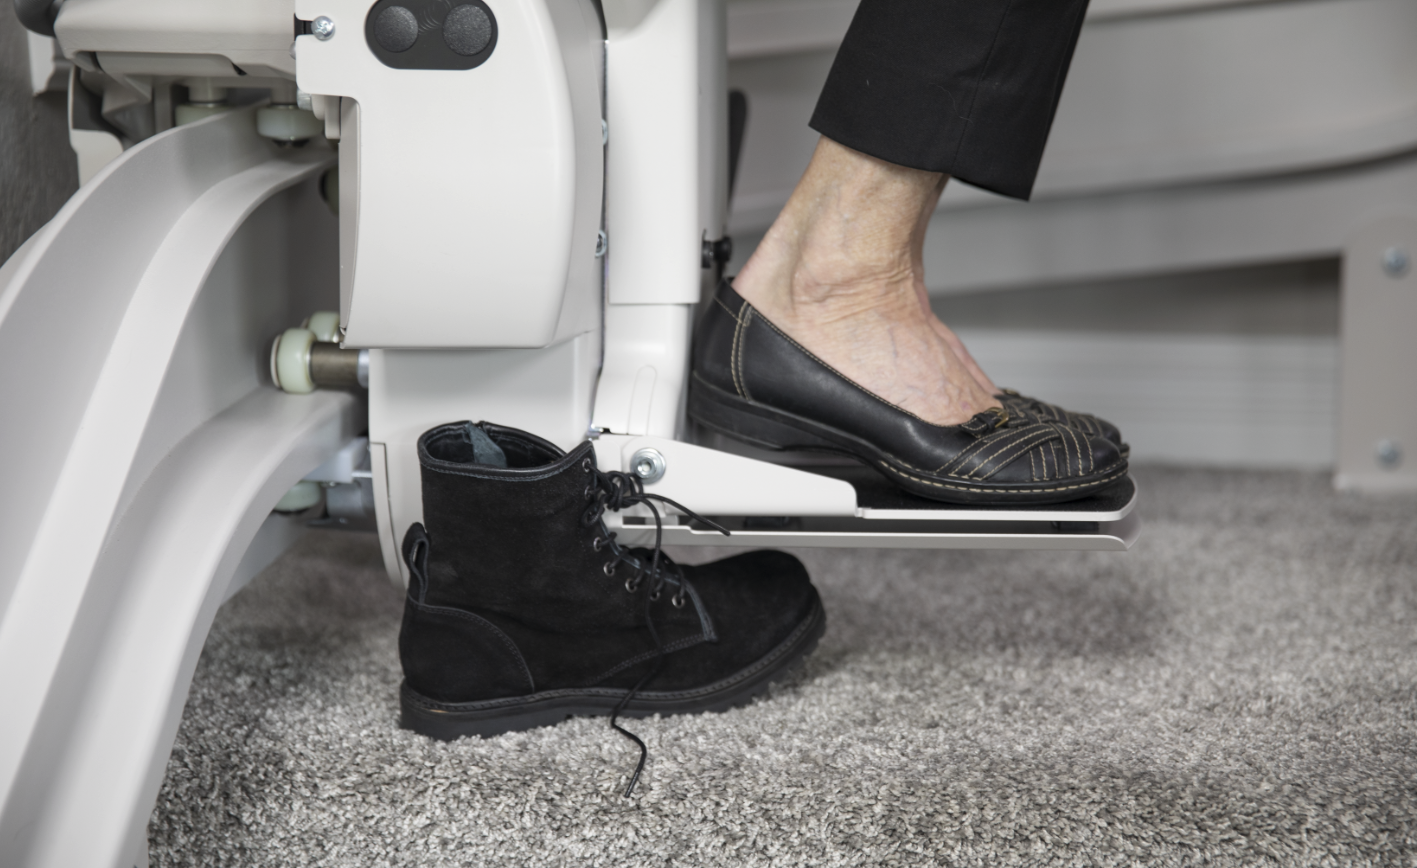 Bruno curved indoor stairlift foot rest